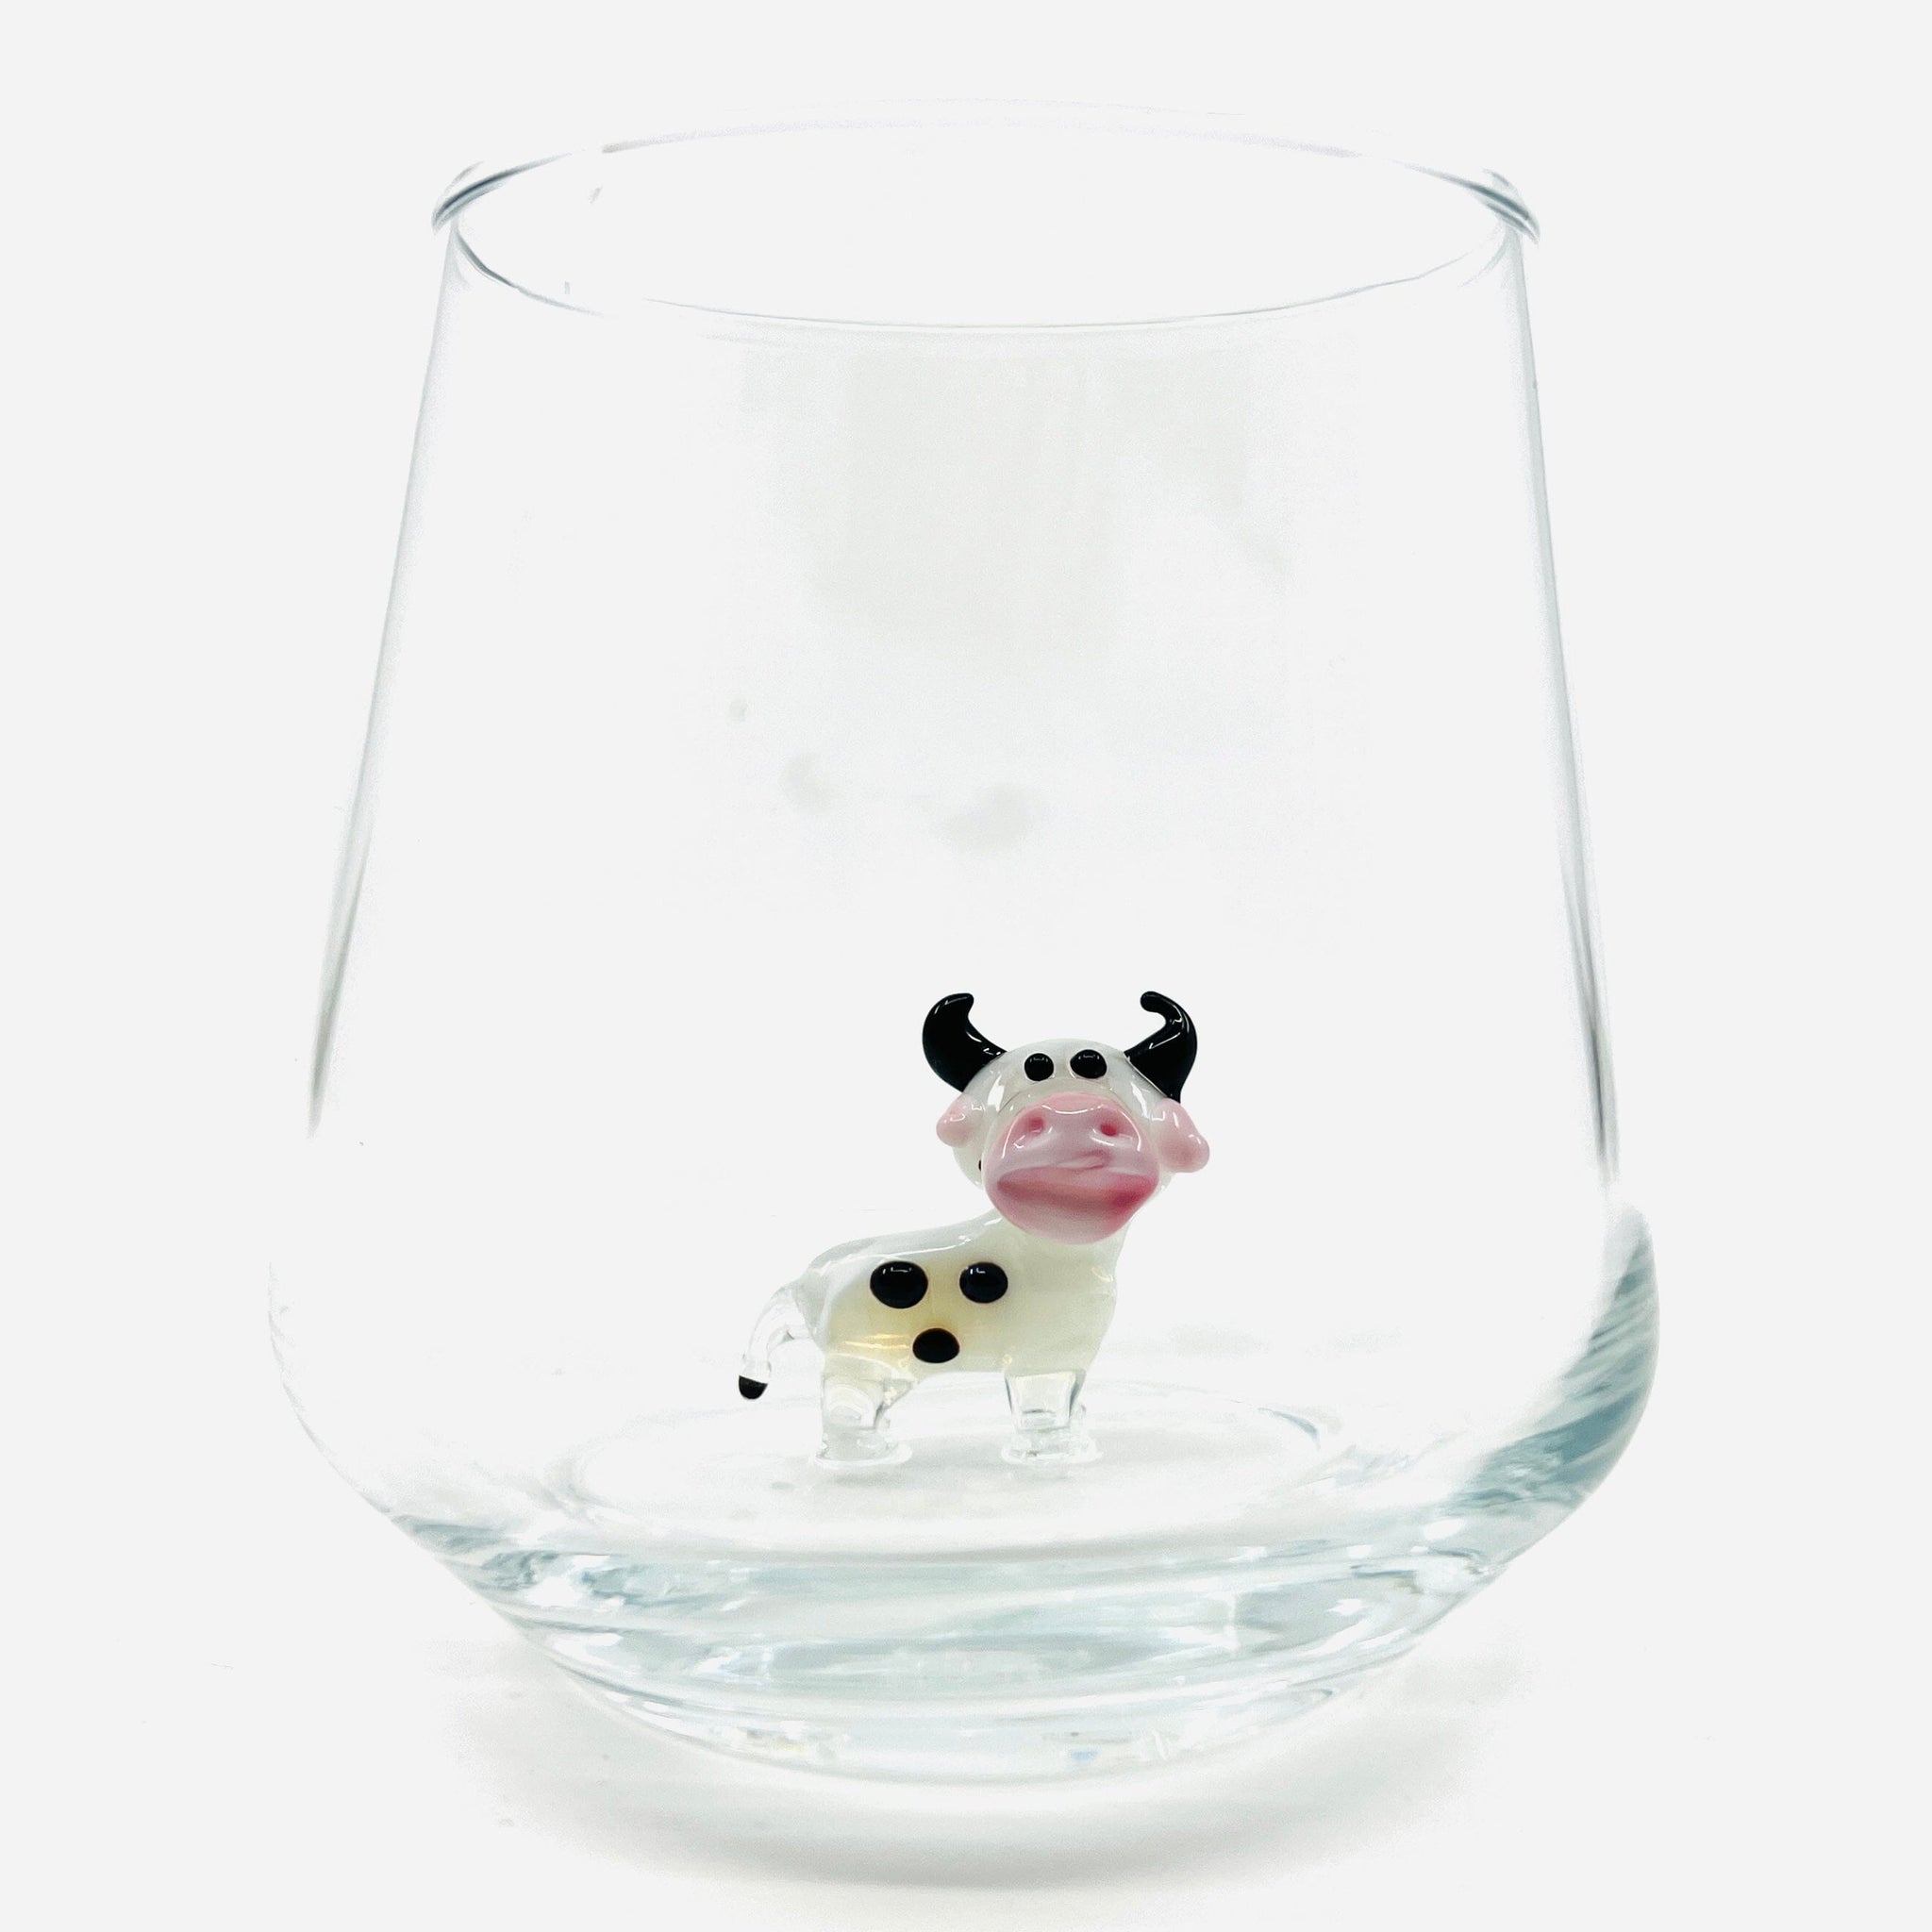 Just a little tipsy with the Quilted Cow Wine Glass – The Quilted Cow